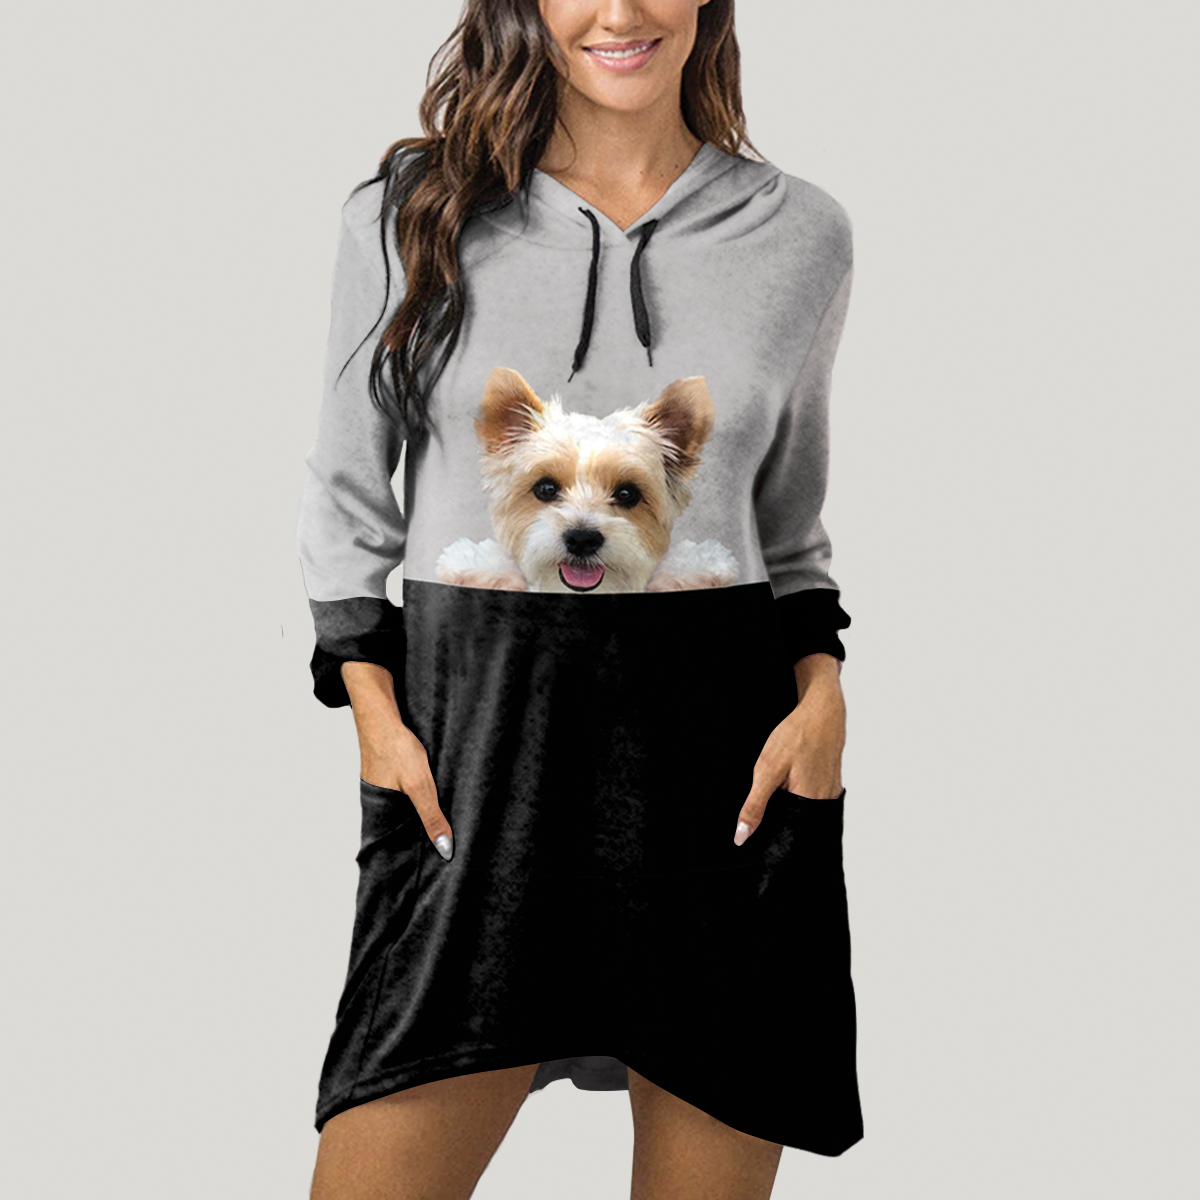 Can You See Me Now - Biewer Terrier Hoodie With Ears V1